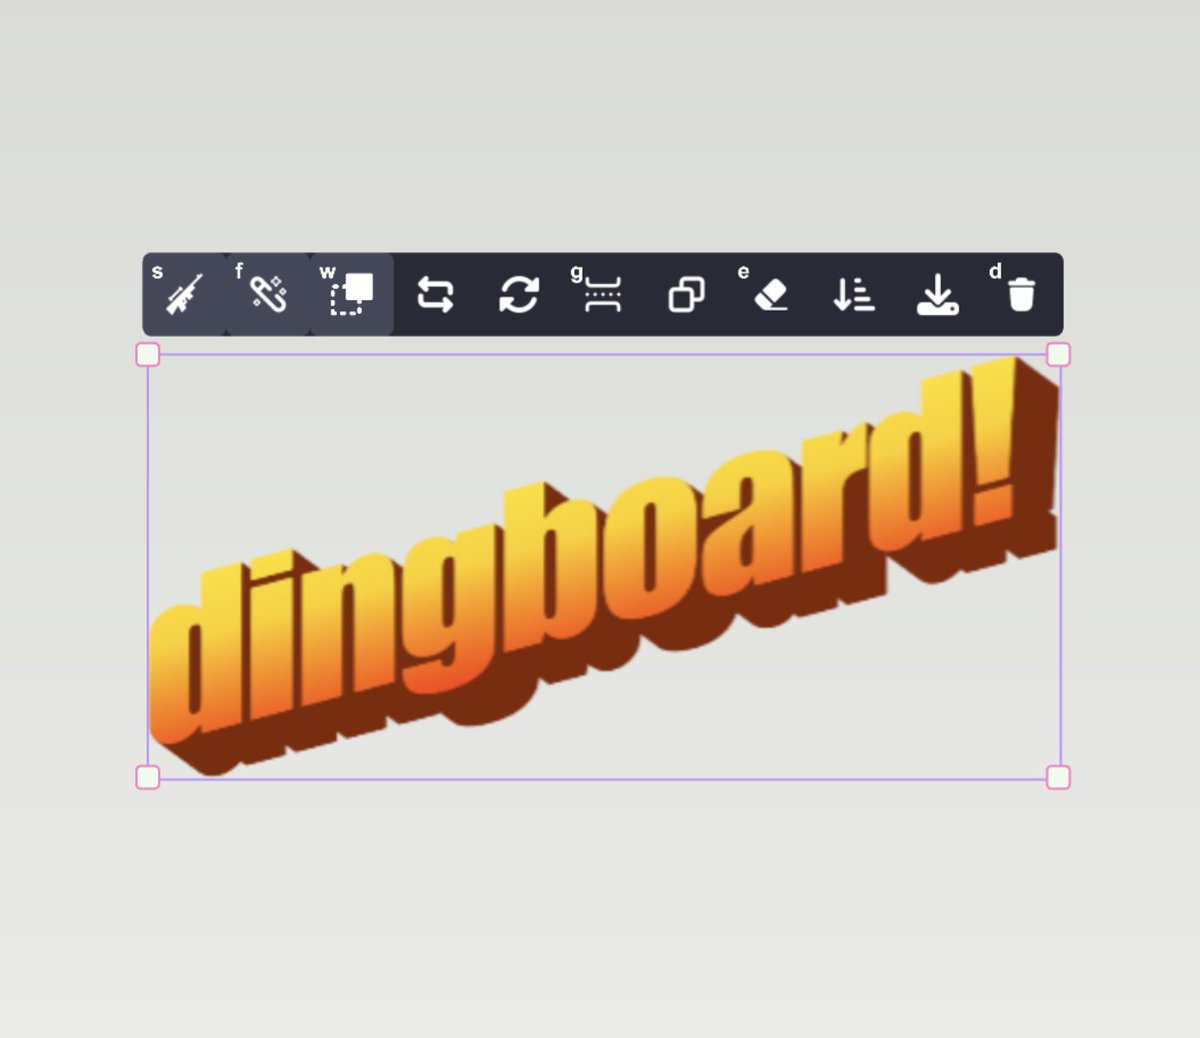 Dingboard has an epic logo. It is perfectly imperfect. Scrappy + DIY/WIP demeanor, whimsical, fun, and retro. @yacineMTB has embedded the logo on dingboard.com as an object that further cements it with the user. They have to interact with it to do anything on…